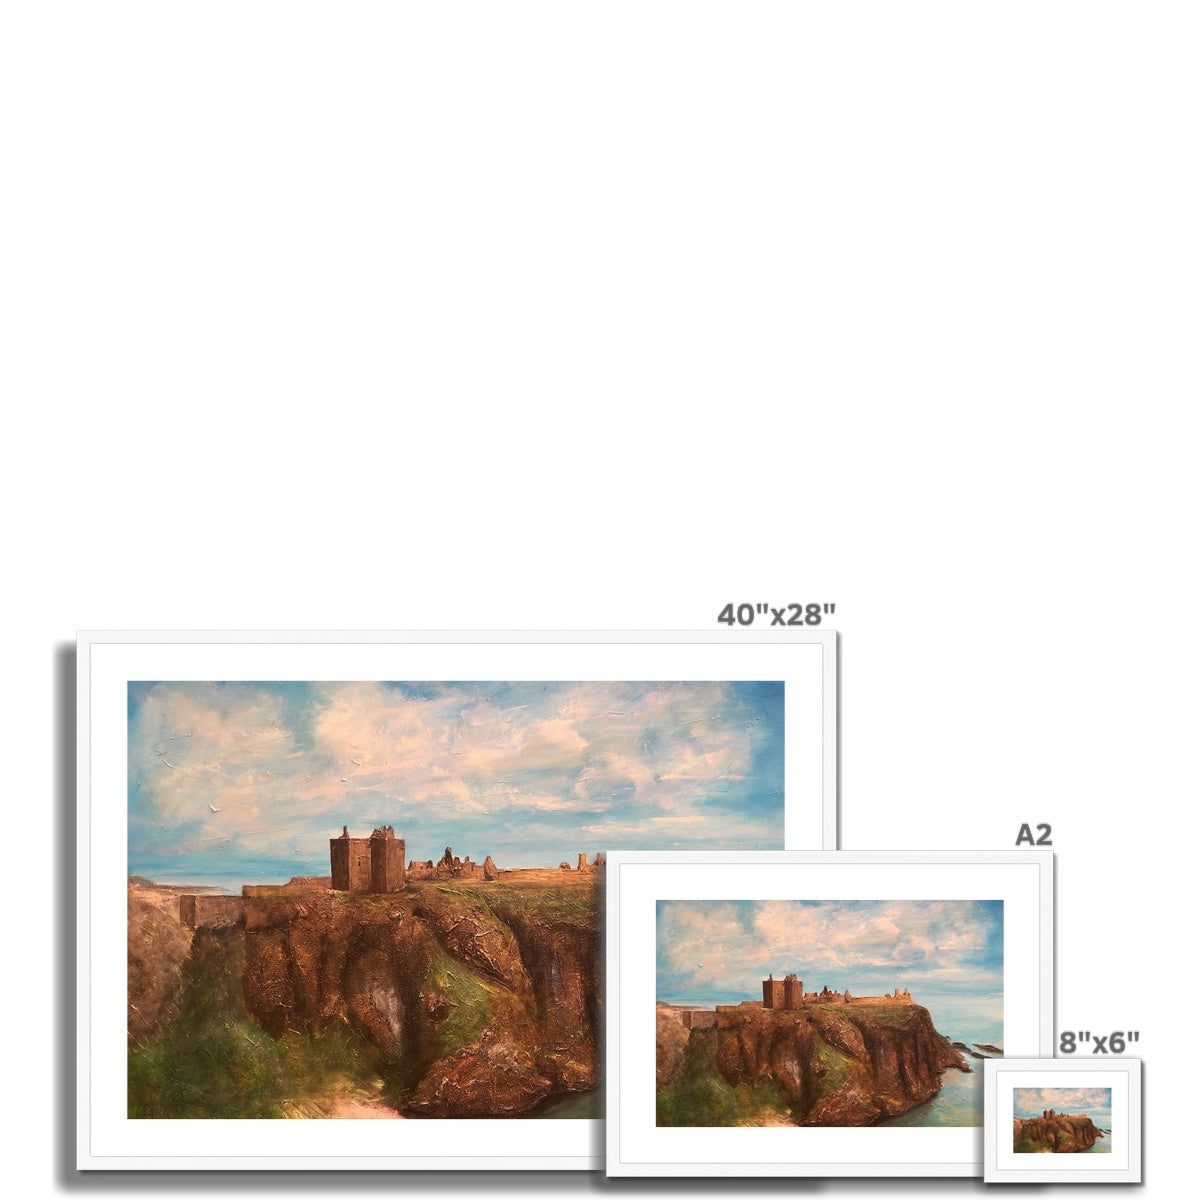 Dunnottar Castle Painting | Framed & Mounted Prints From Scotland-Framed & Mounted Prints-Historic & Iconic Scotland Art Gallery-Paintings, Prints, Homeware, Art Gifts From Scotland By Scottish Artist Kevin Hunter